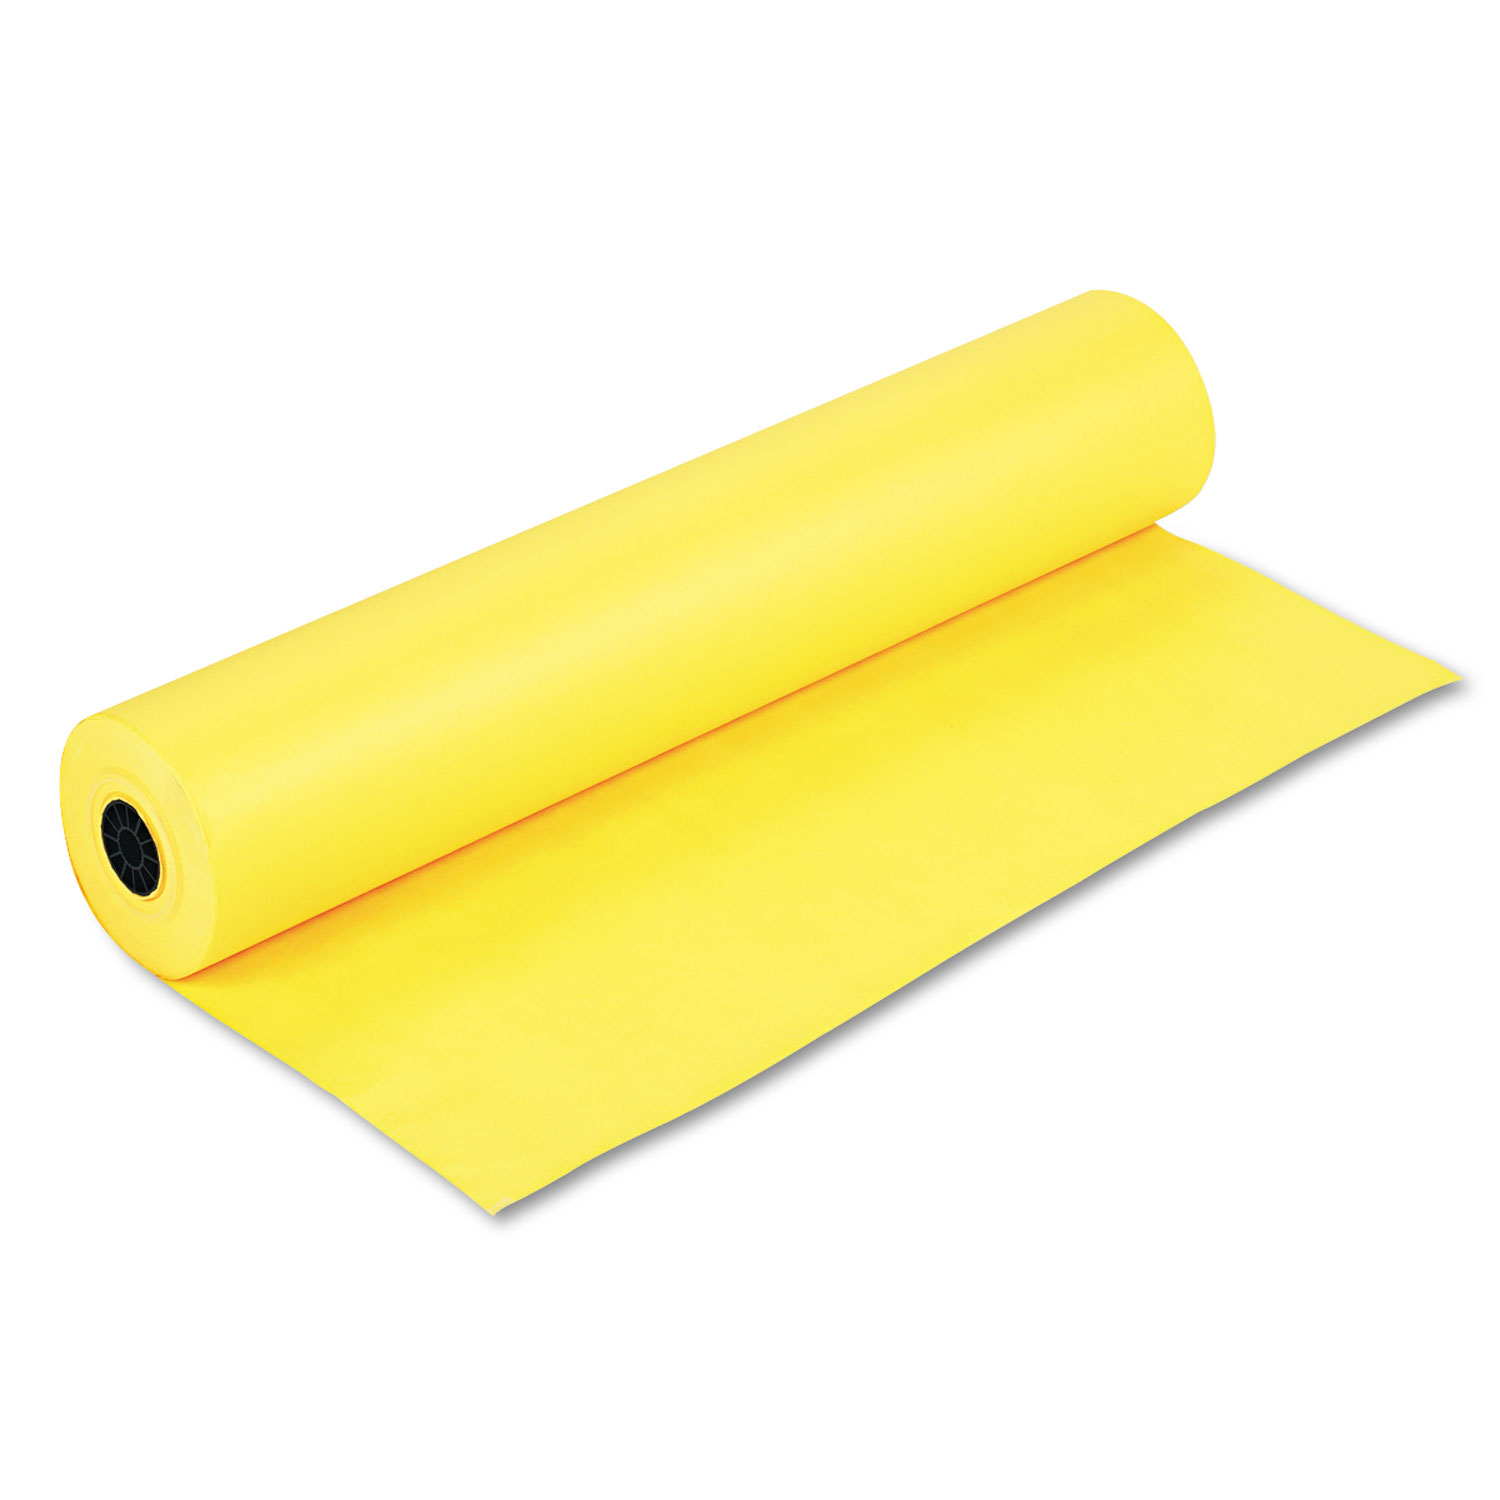 Pacon PAC63080 Rainbow Duo-Finish Colored Kraft Paper, 35 lbs., 36" x 1000 ft, Canary